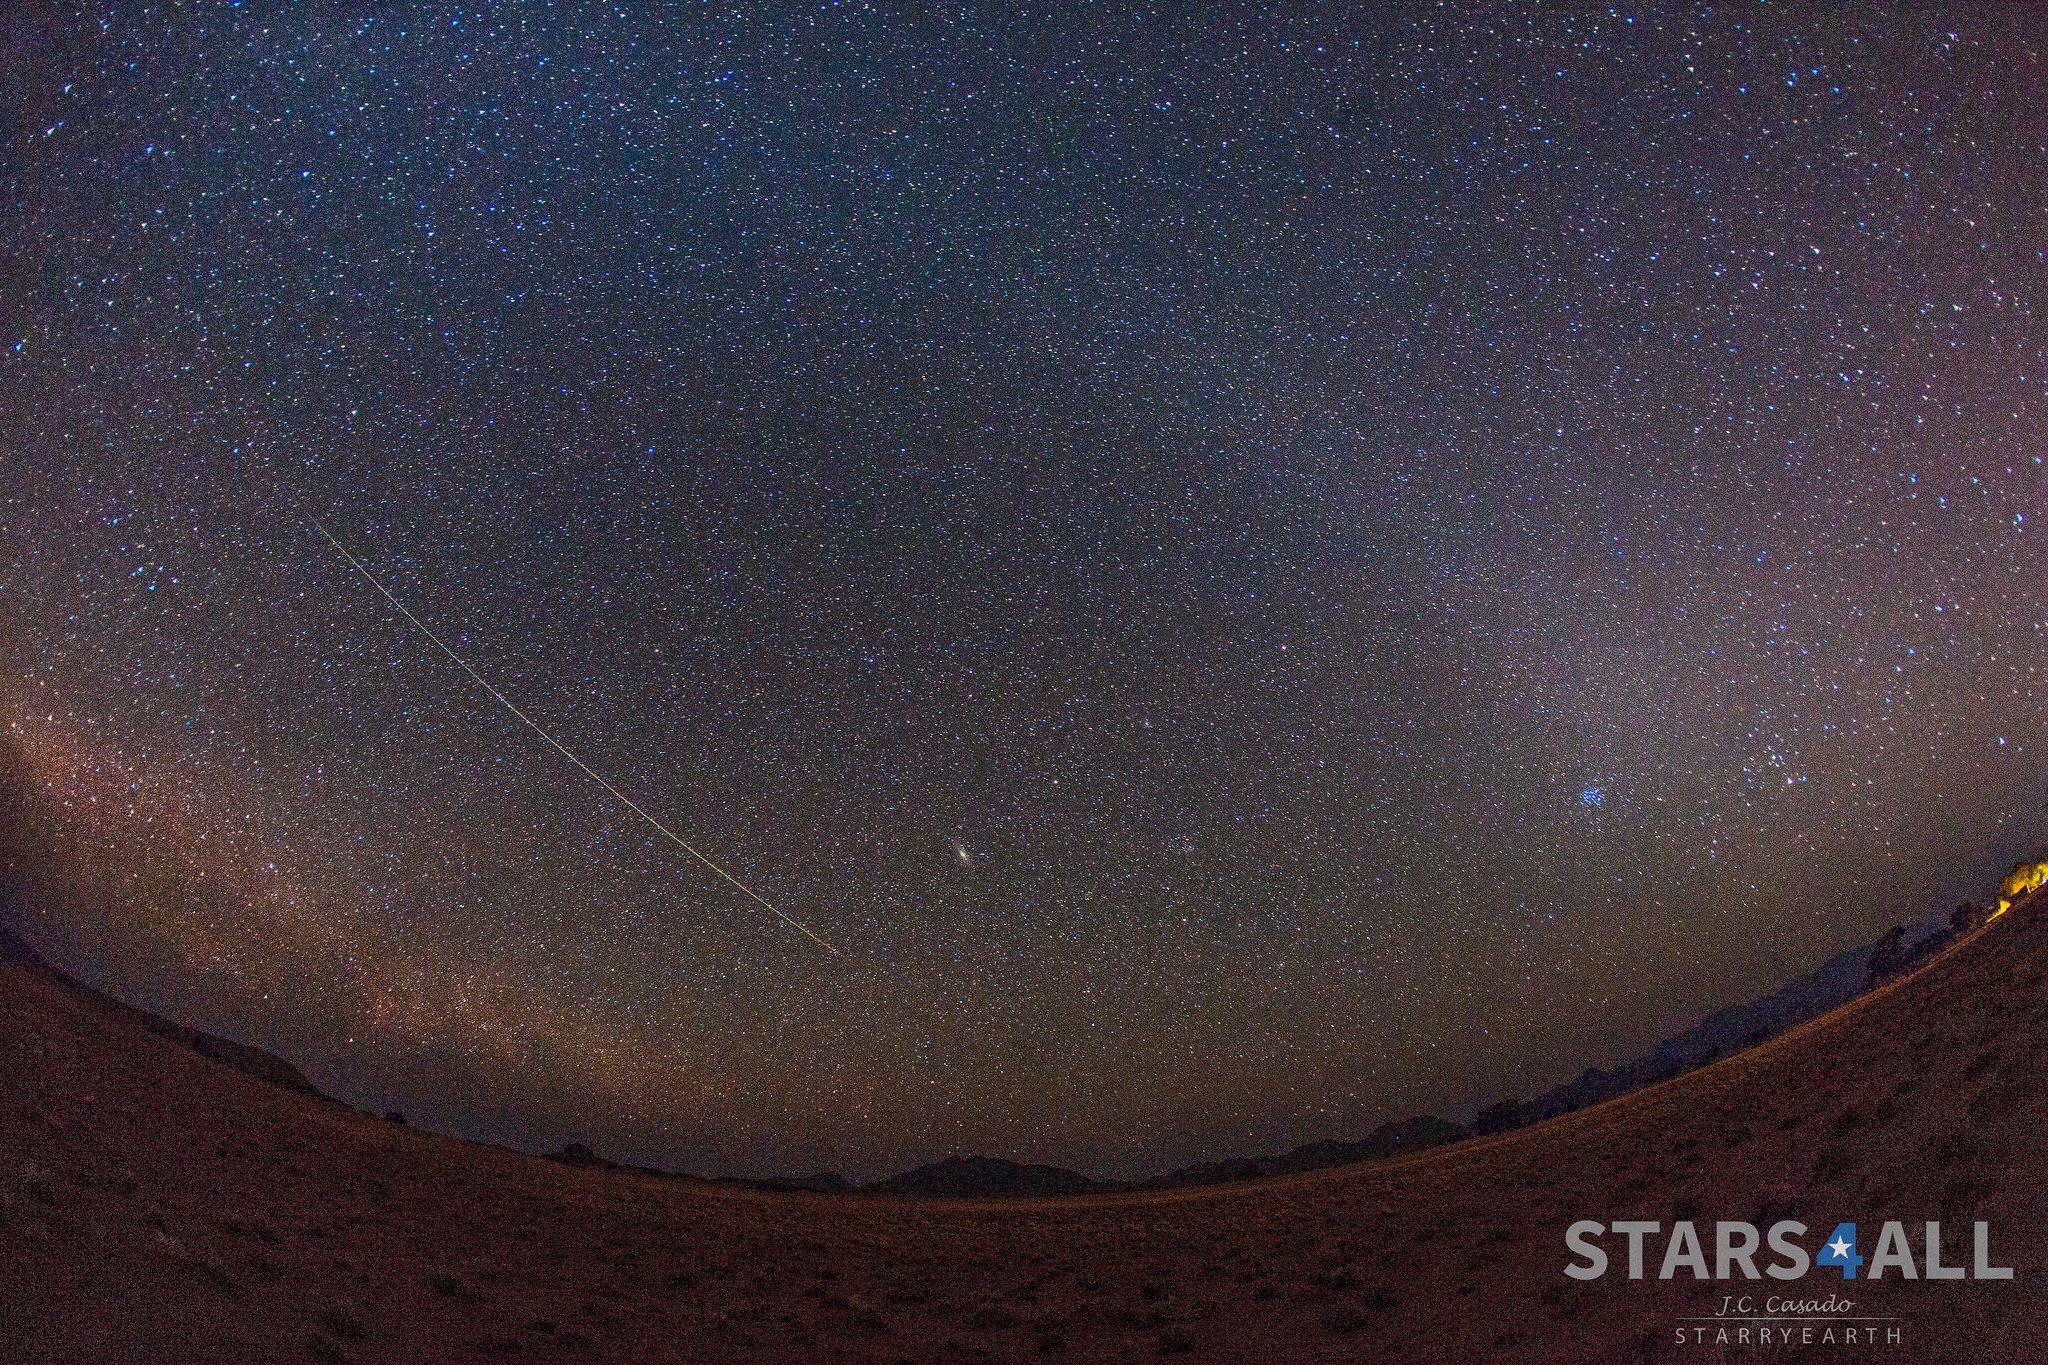 Perseid on night August 11th 2016 from Sesriem (Namibia). It&#039;s also visible the zodiacal light.